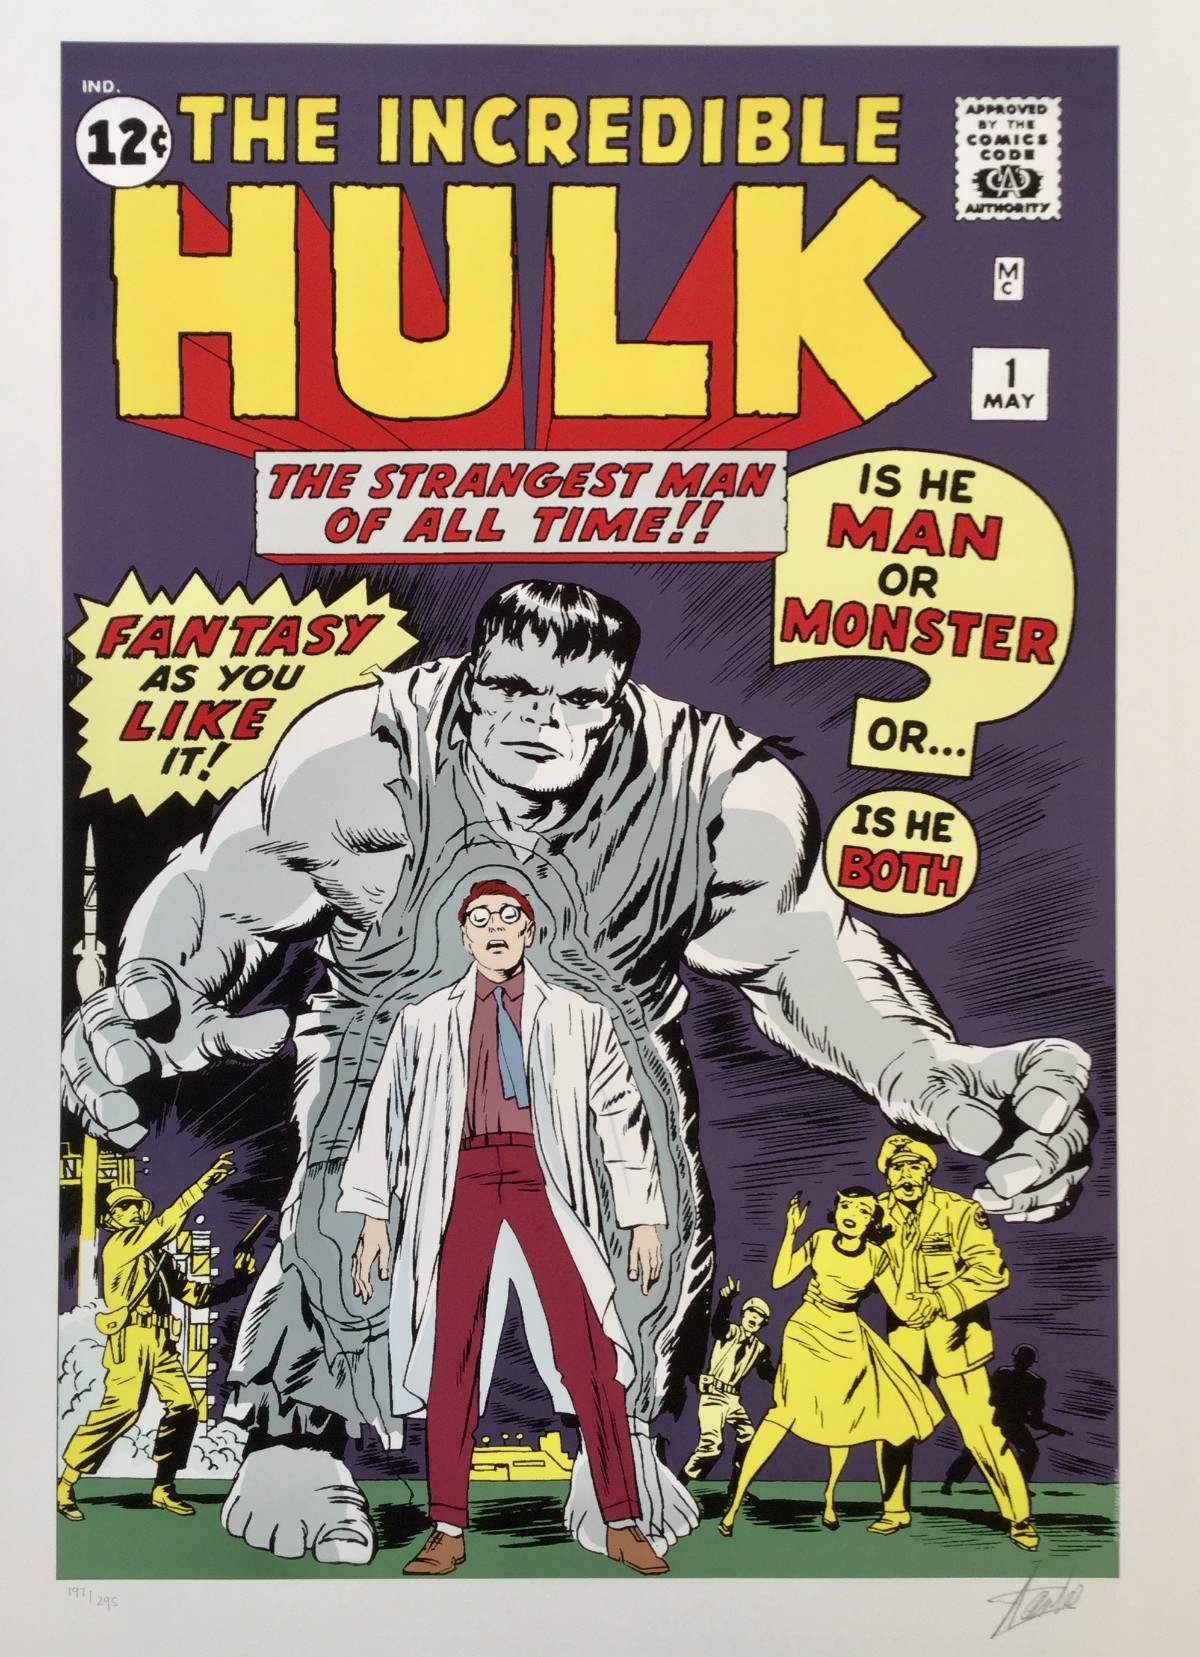 The Strangest Man of all Time by Marvel Comics - Stan Lee